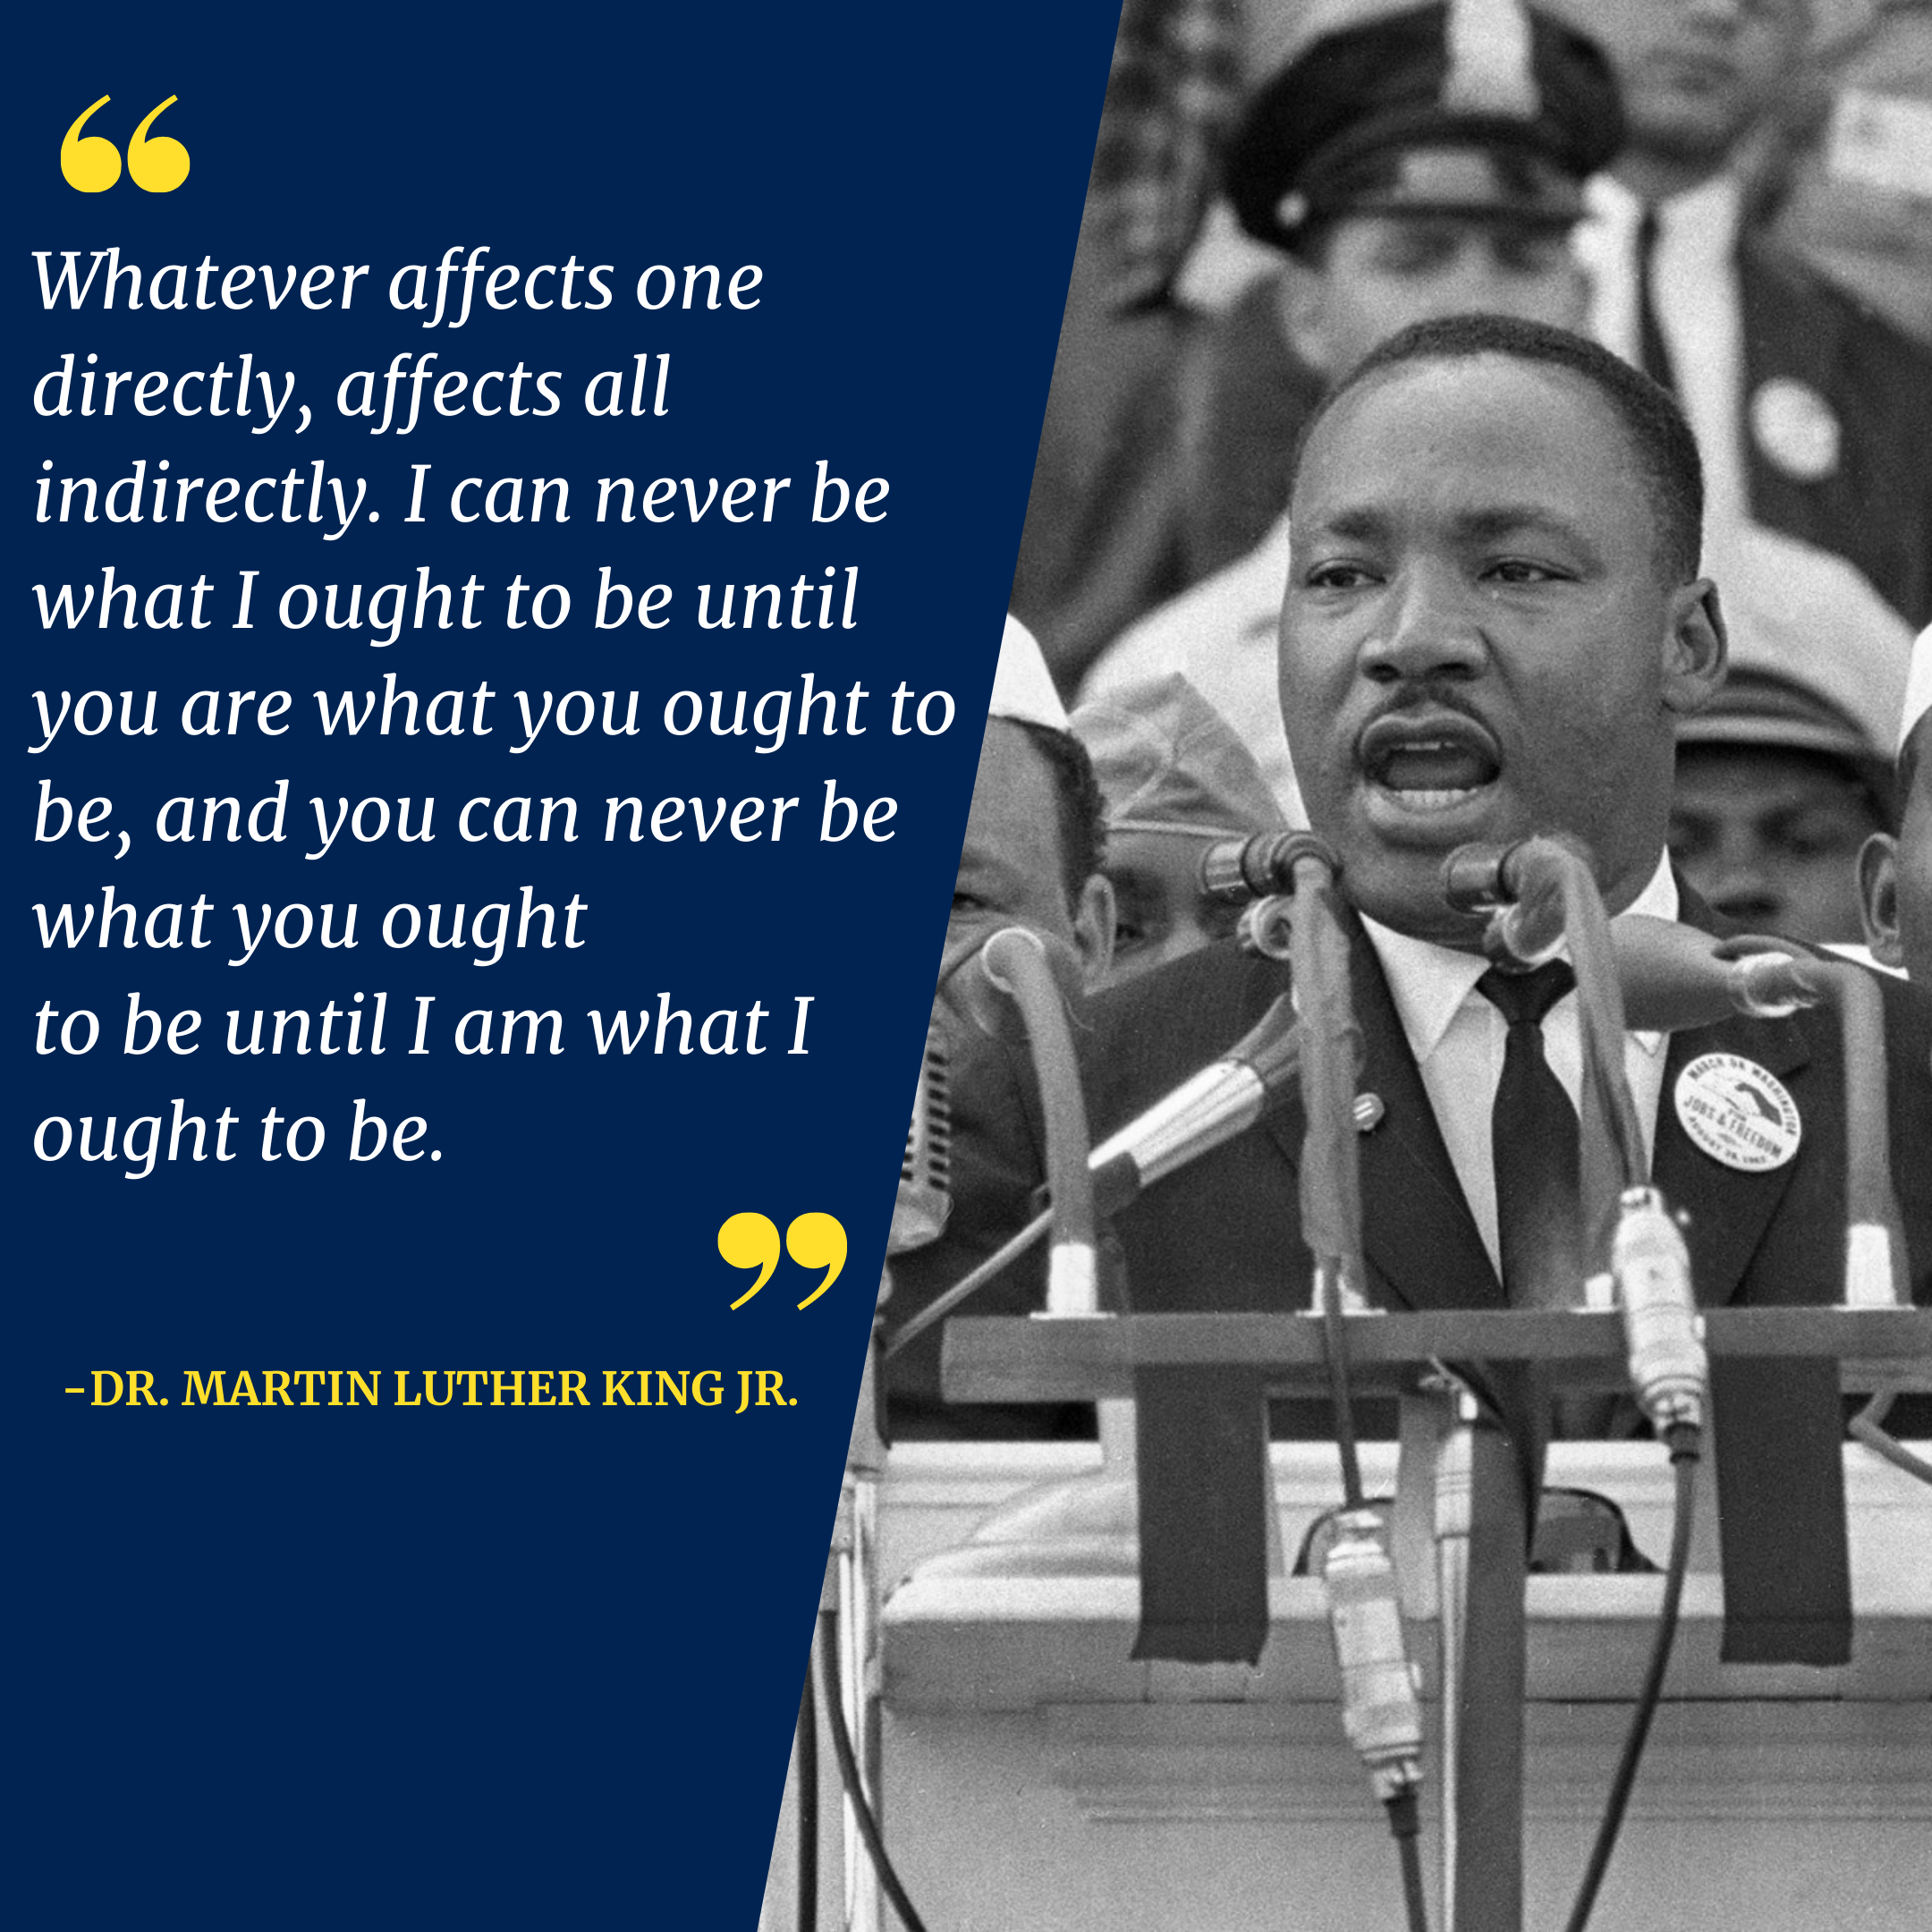 Image with a photo of Dr. Martin Luther King Jr and a quote: Whatever affects one directly, affects all indirectly. I can never be what I ought to be until you are what you ought to be, and you can never be what you ought to be until I am what I ought to be. 